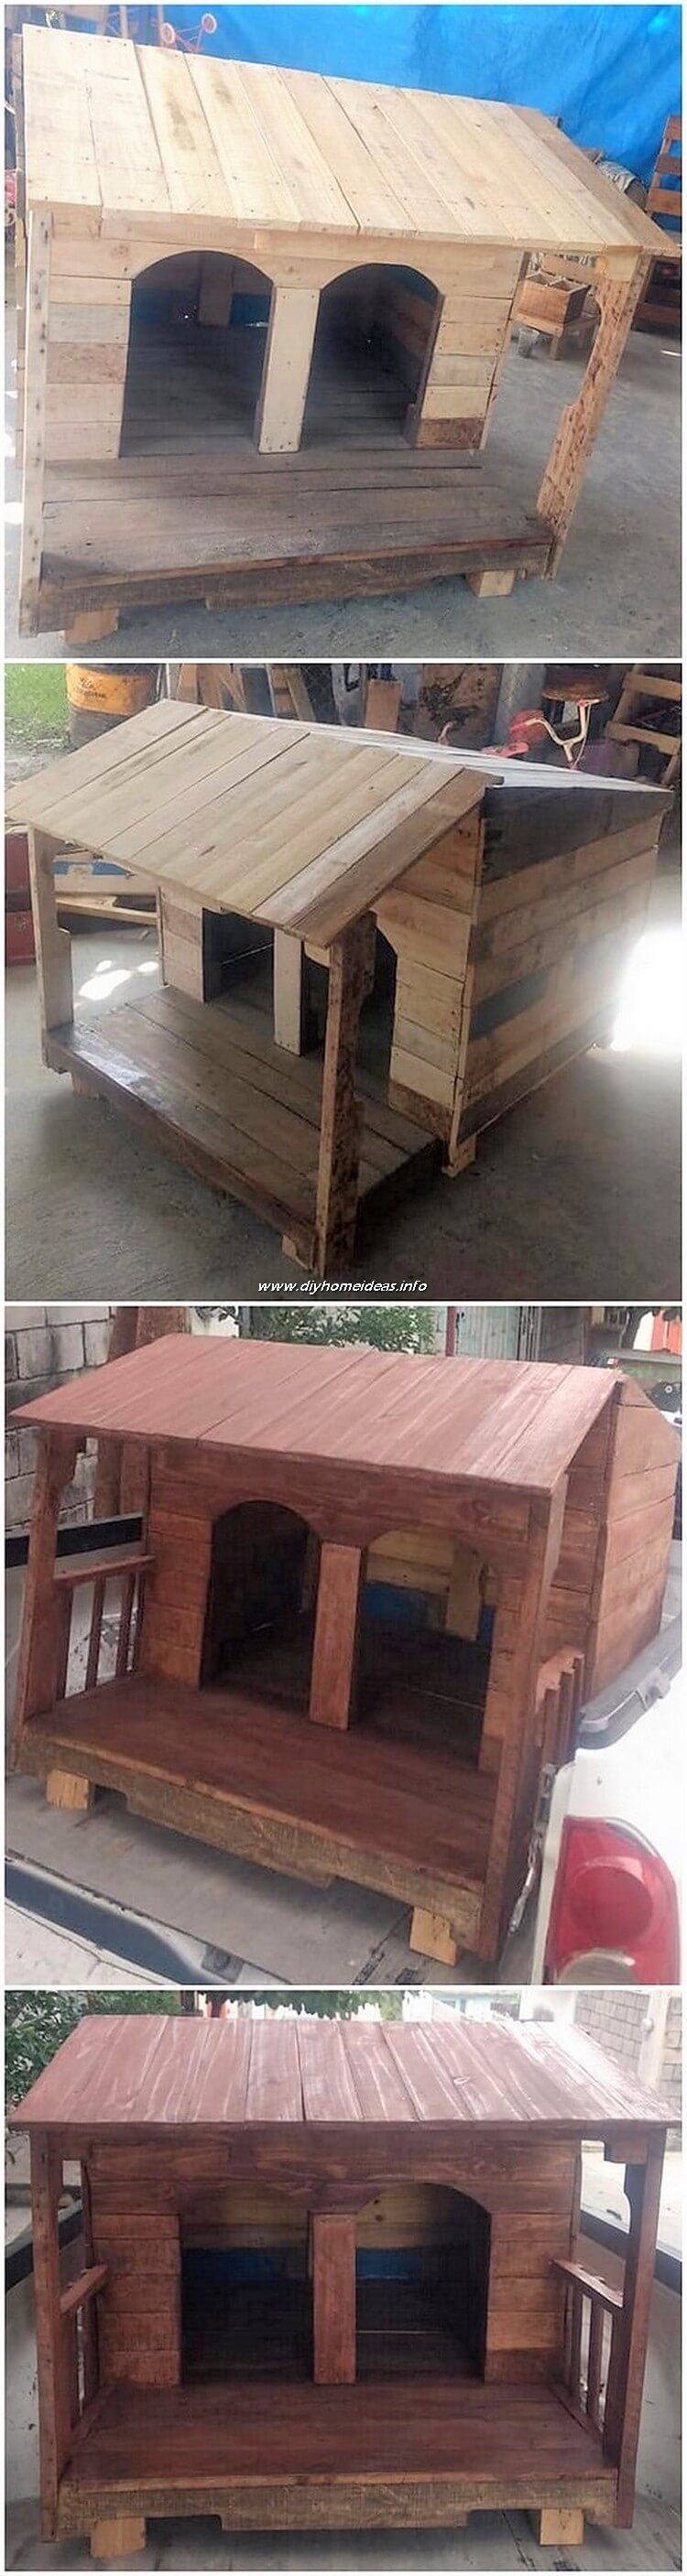 Recycled Pallet Dog House